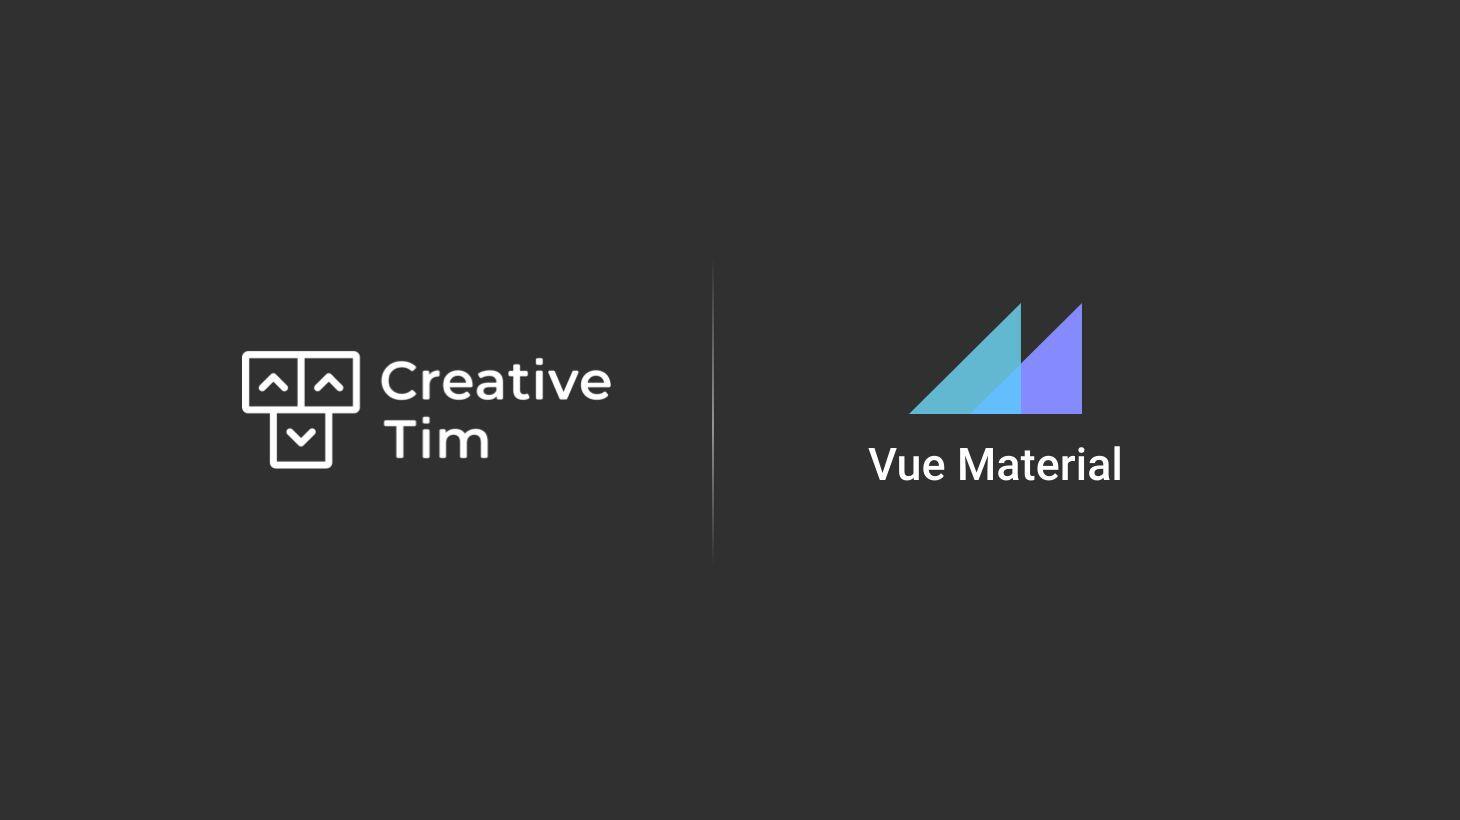 vue-material-is-now-part-of-the-creative-tim-family